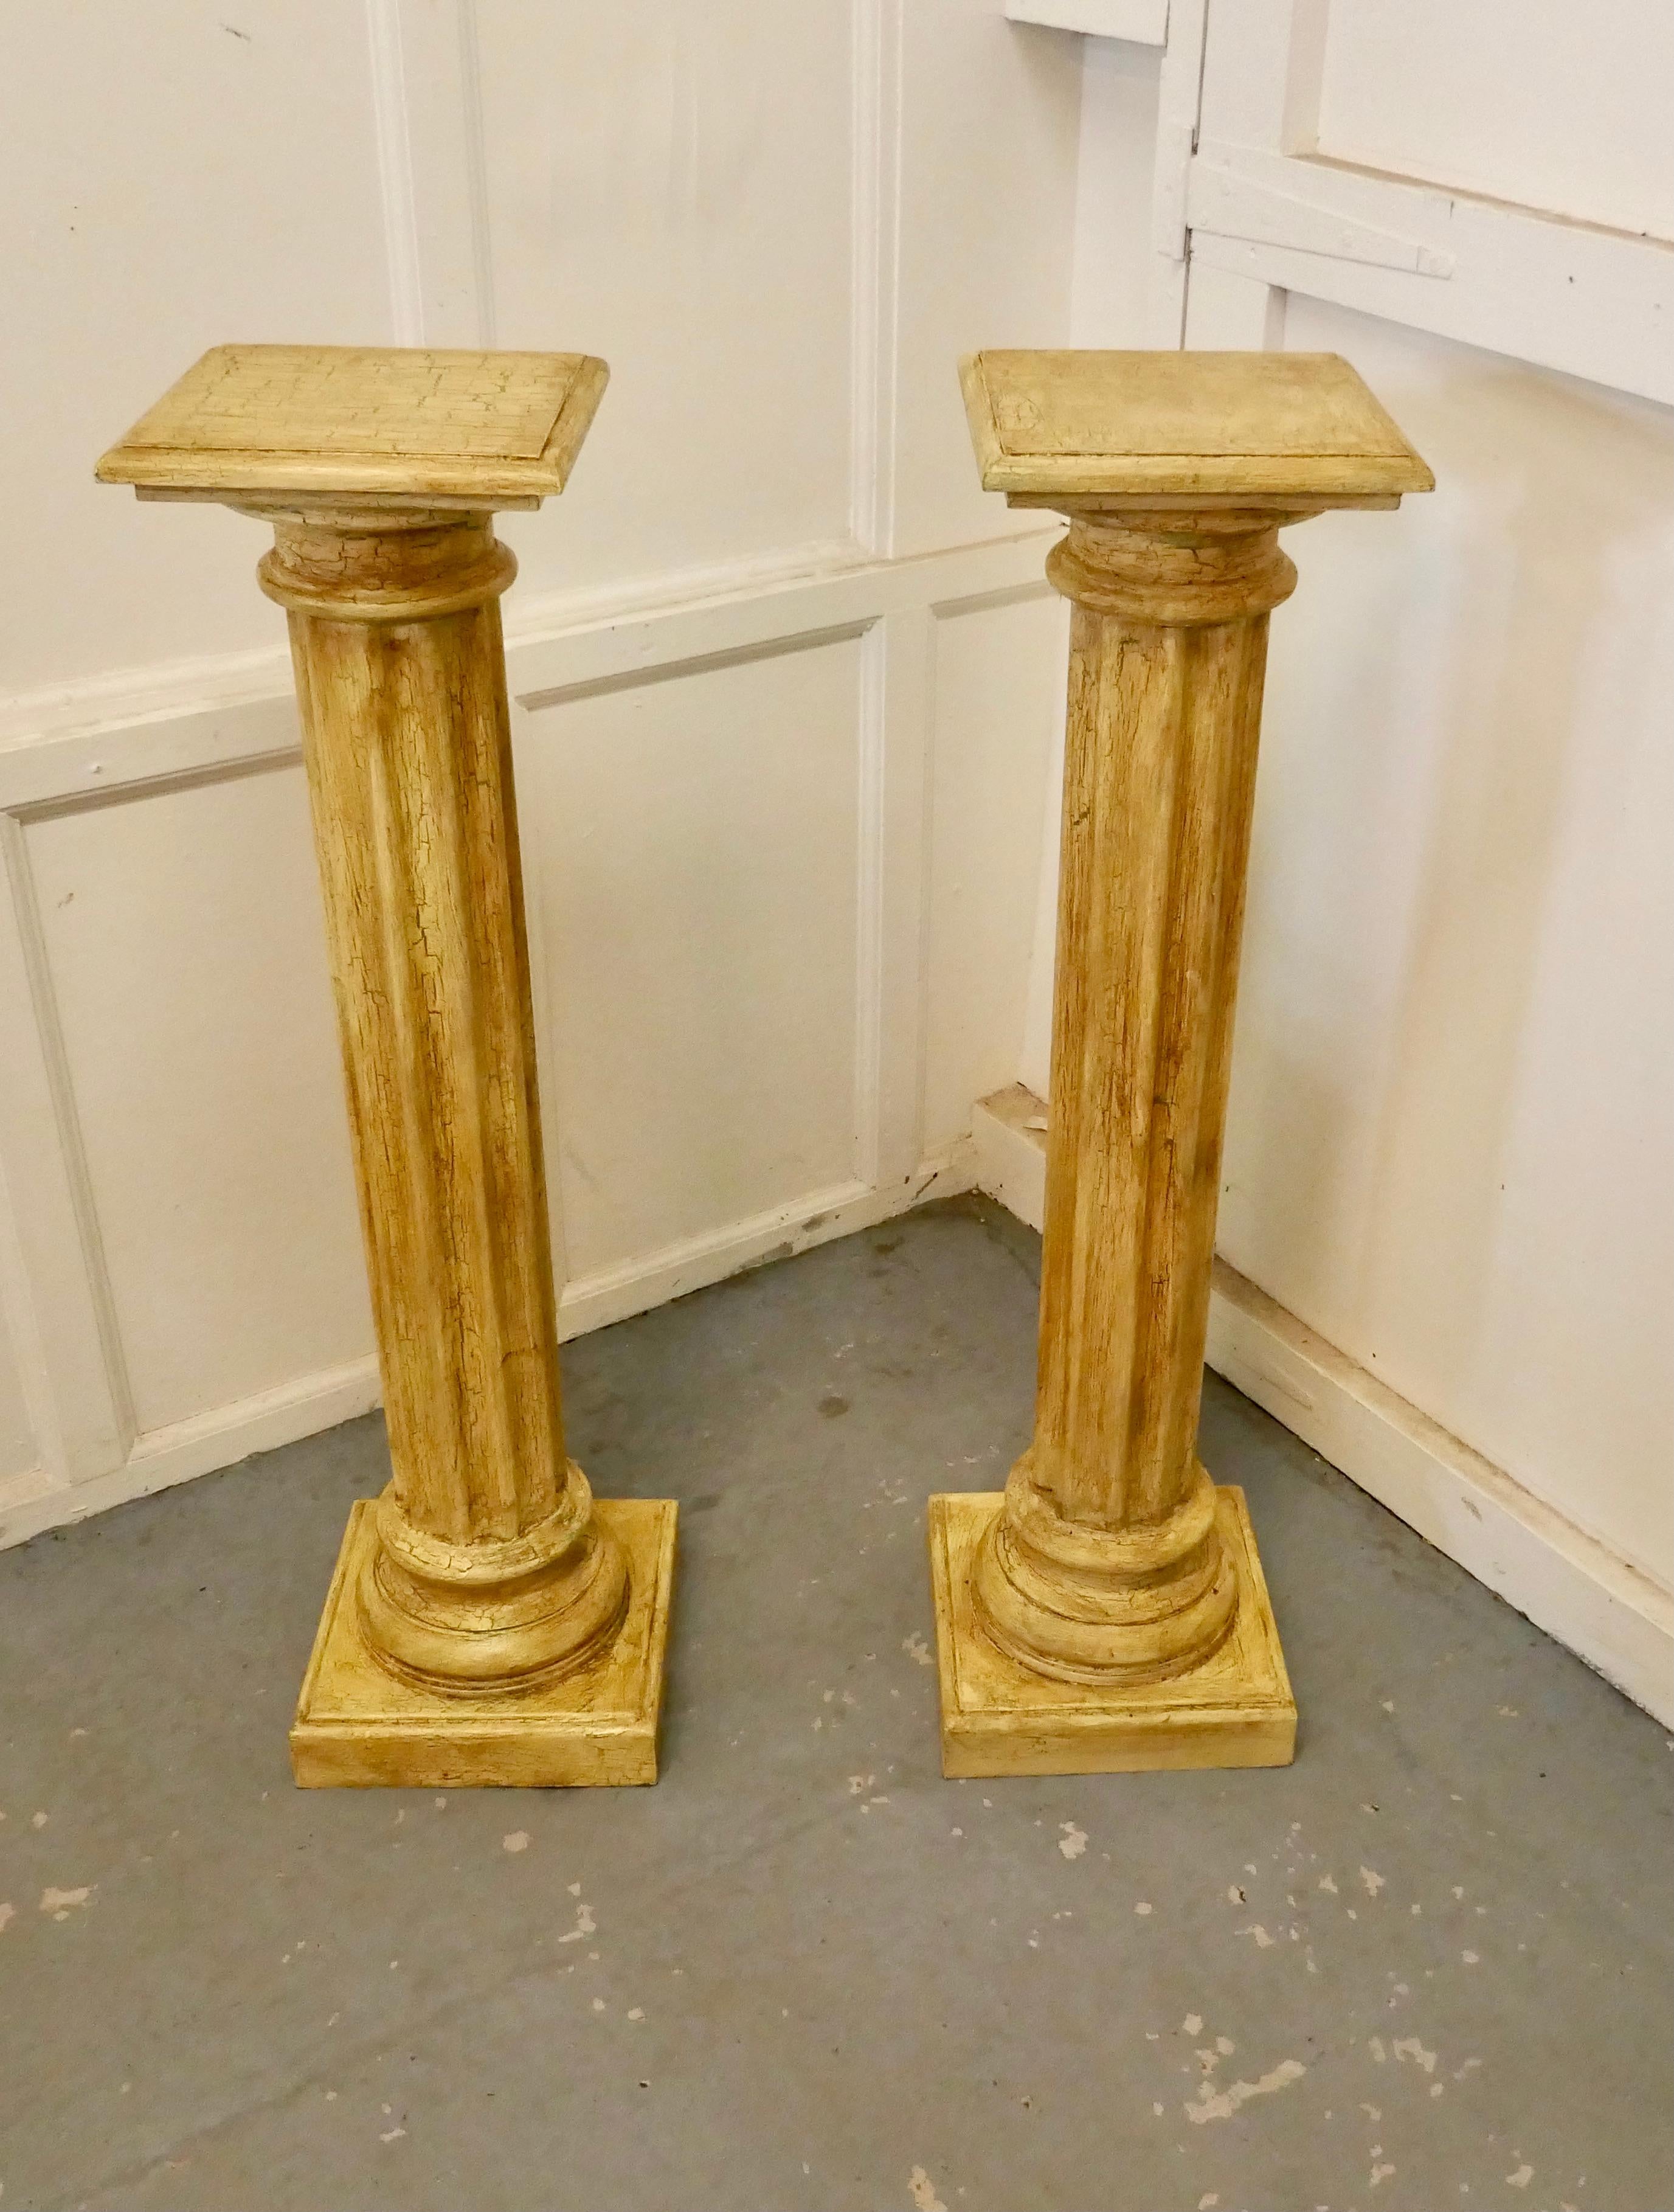 Pair of Classical column pedestals in distressed crackle finish paint.

A superb pair of fluted classical column pedestals, the pedestals are made in wood and painted in a dark Cream crackle finish 


The columns are 42” tall and 12” square on